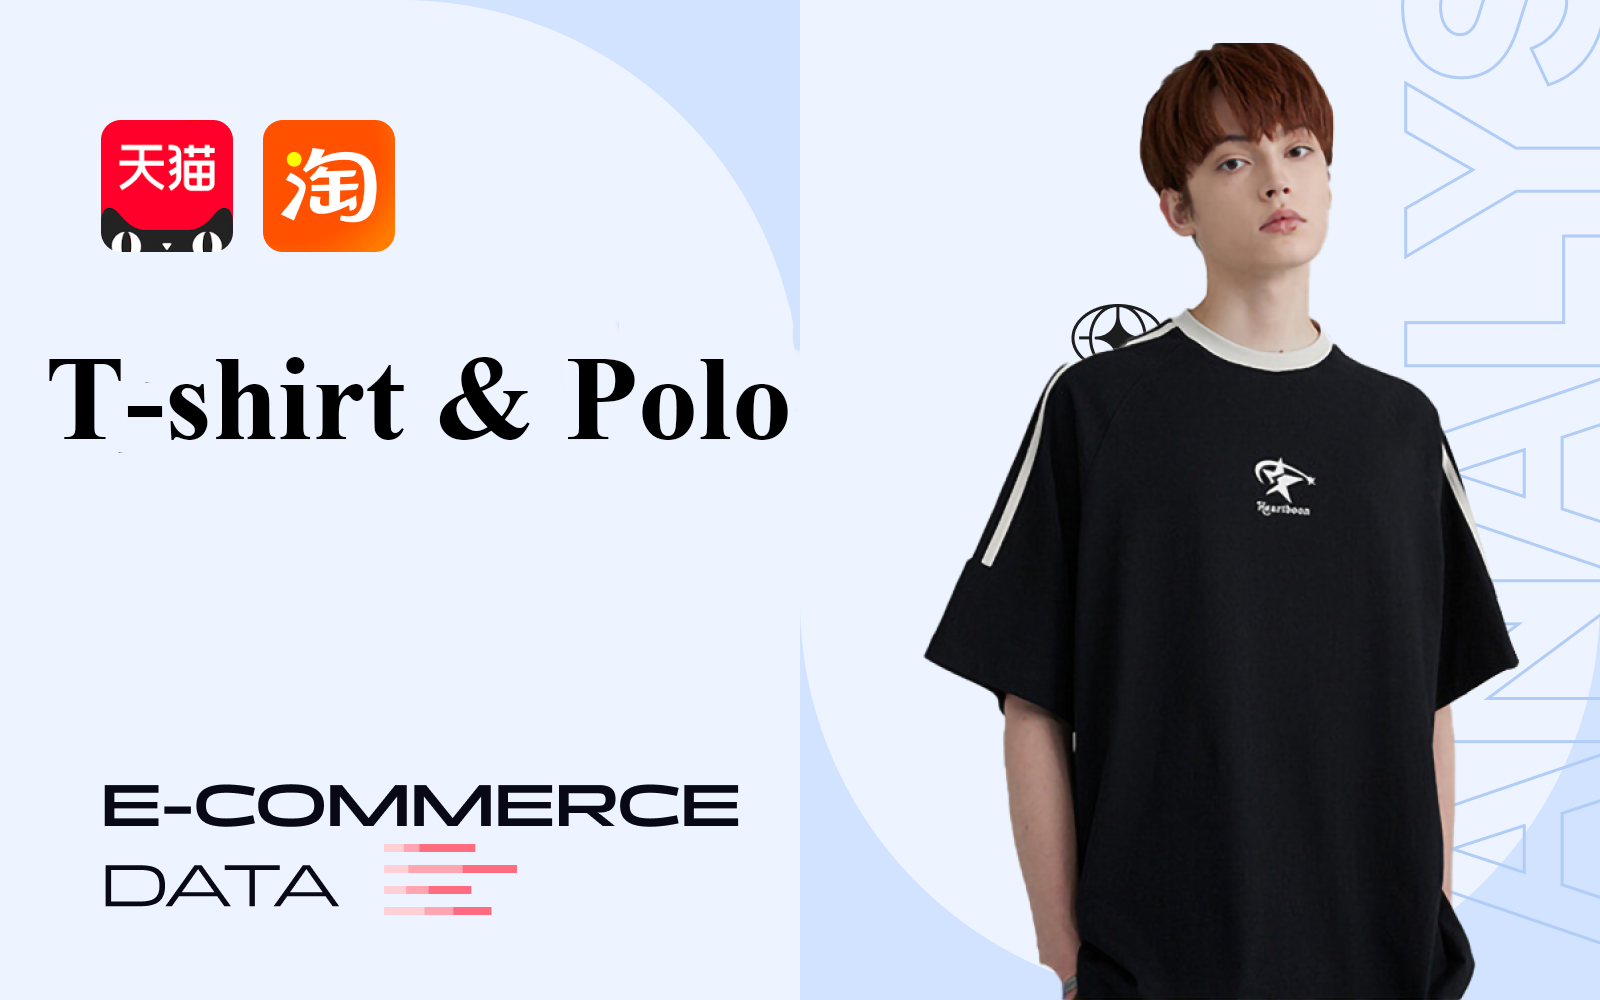 T-shirt/Polo -- The Data Analysis of Menswear E-Commerce